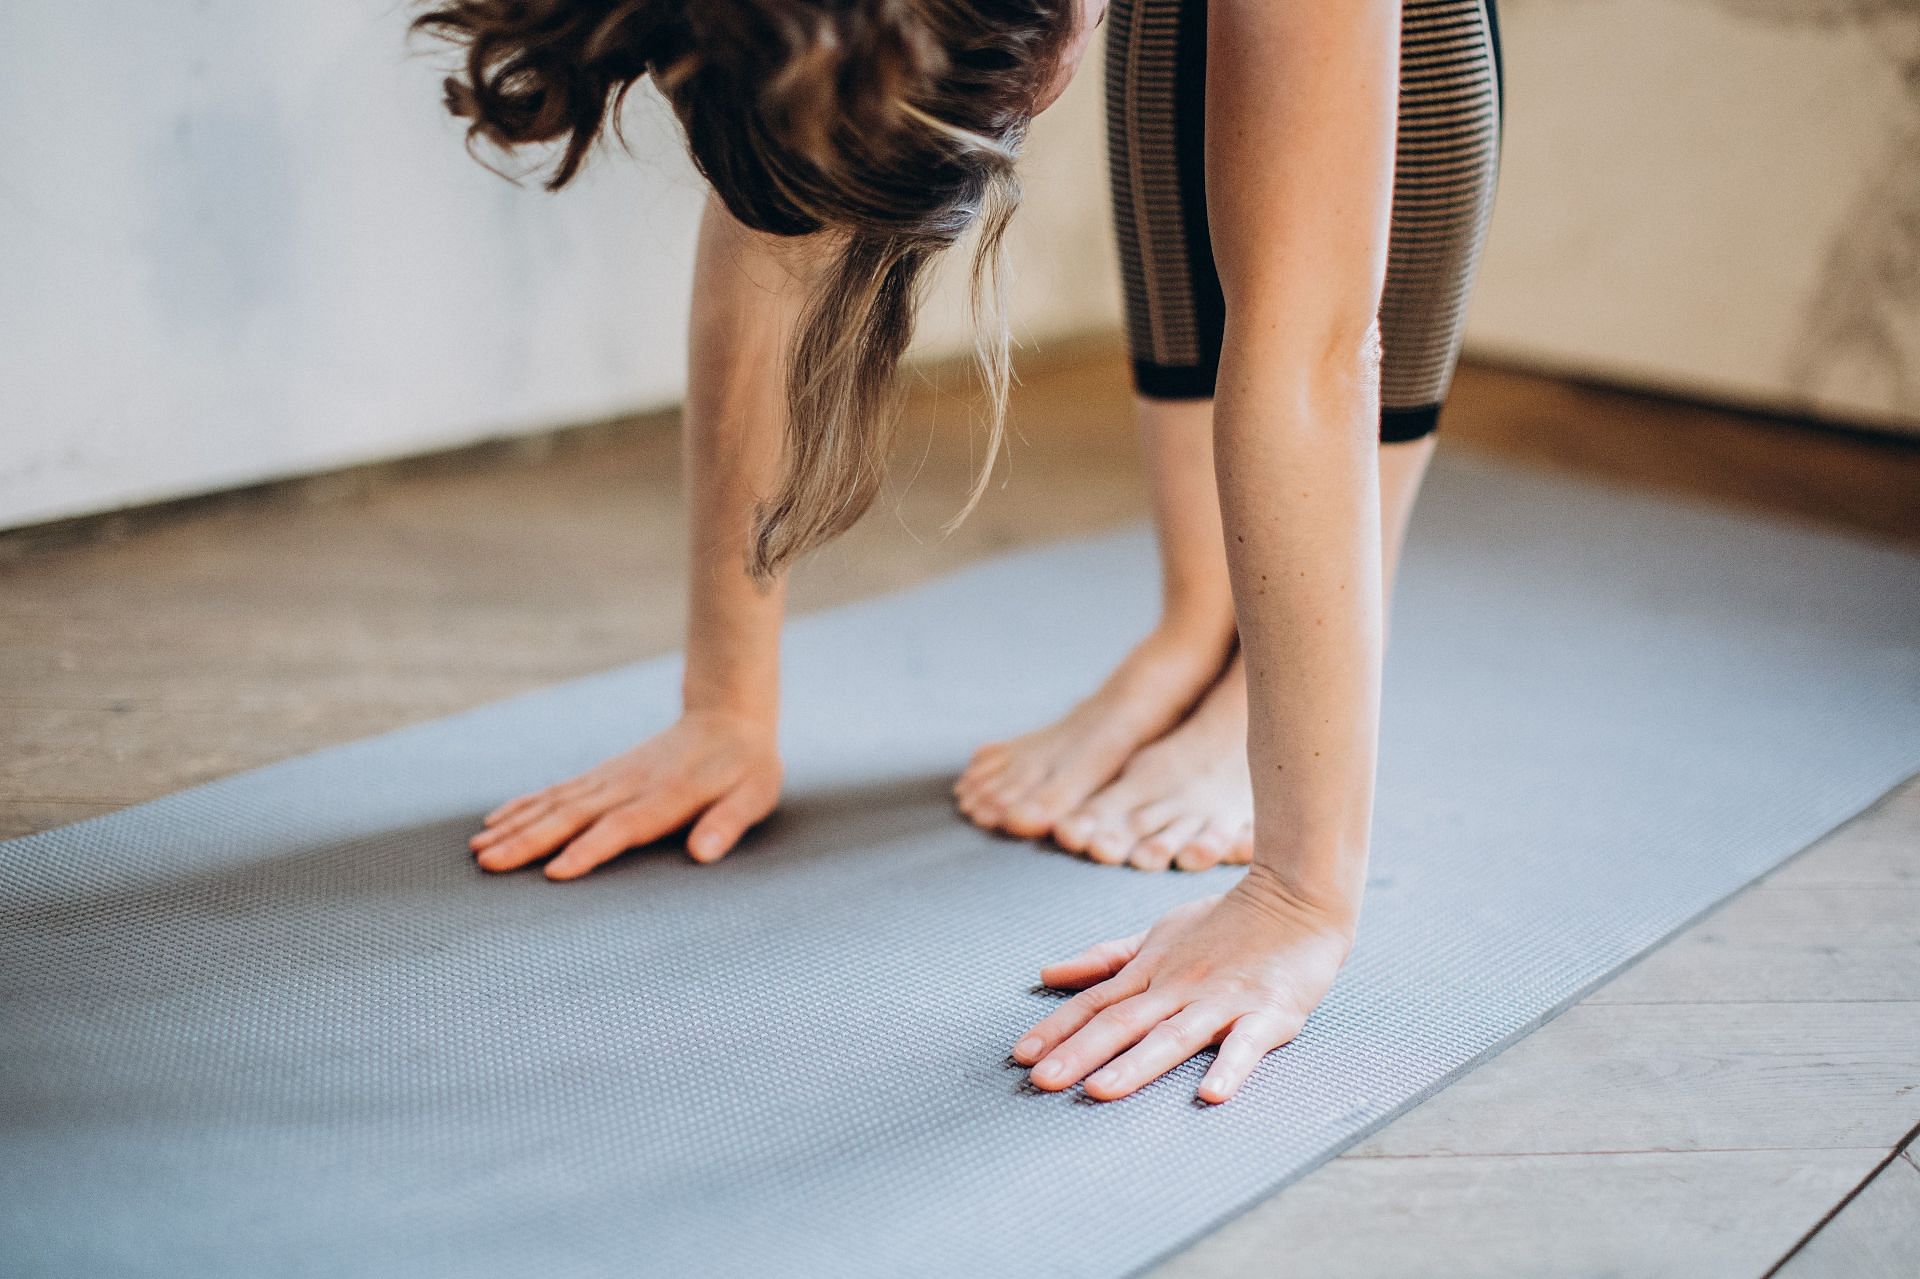 tips for beginning yoga (Image sourced via Pexels / Photo by Elina)